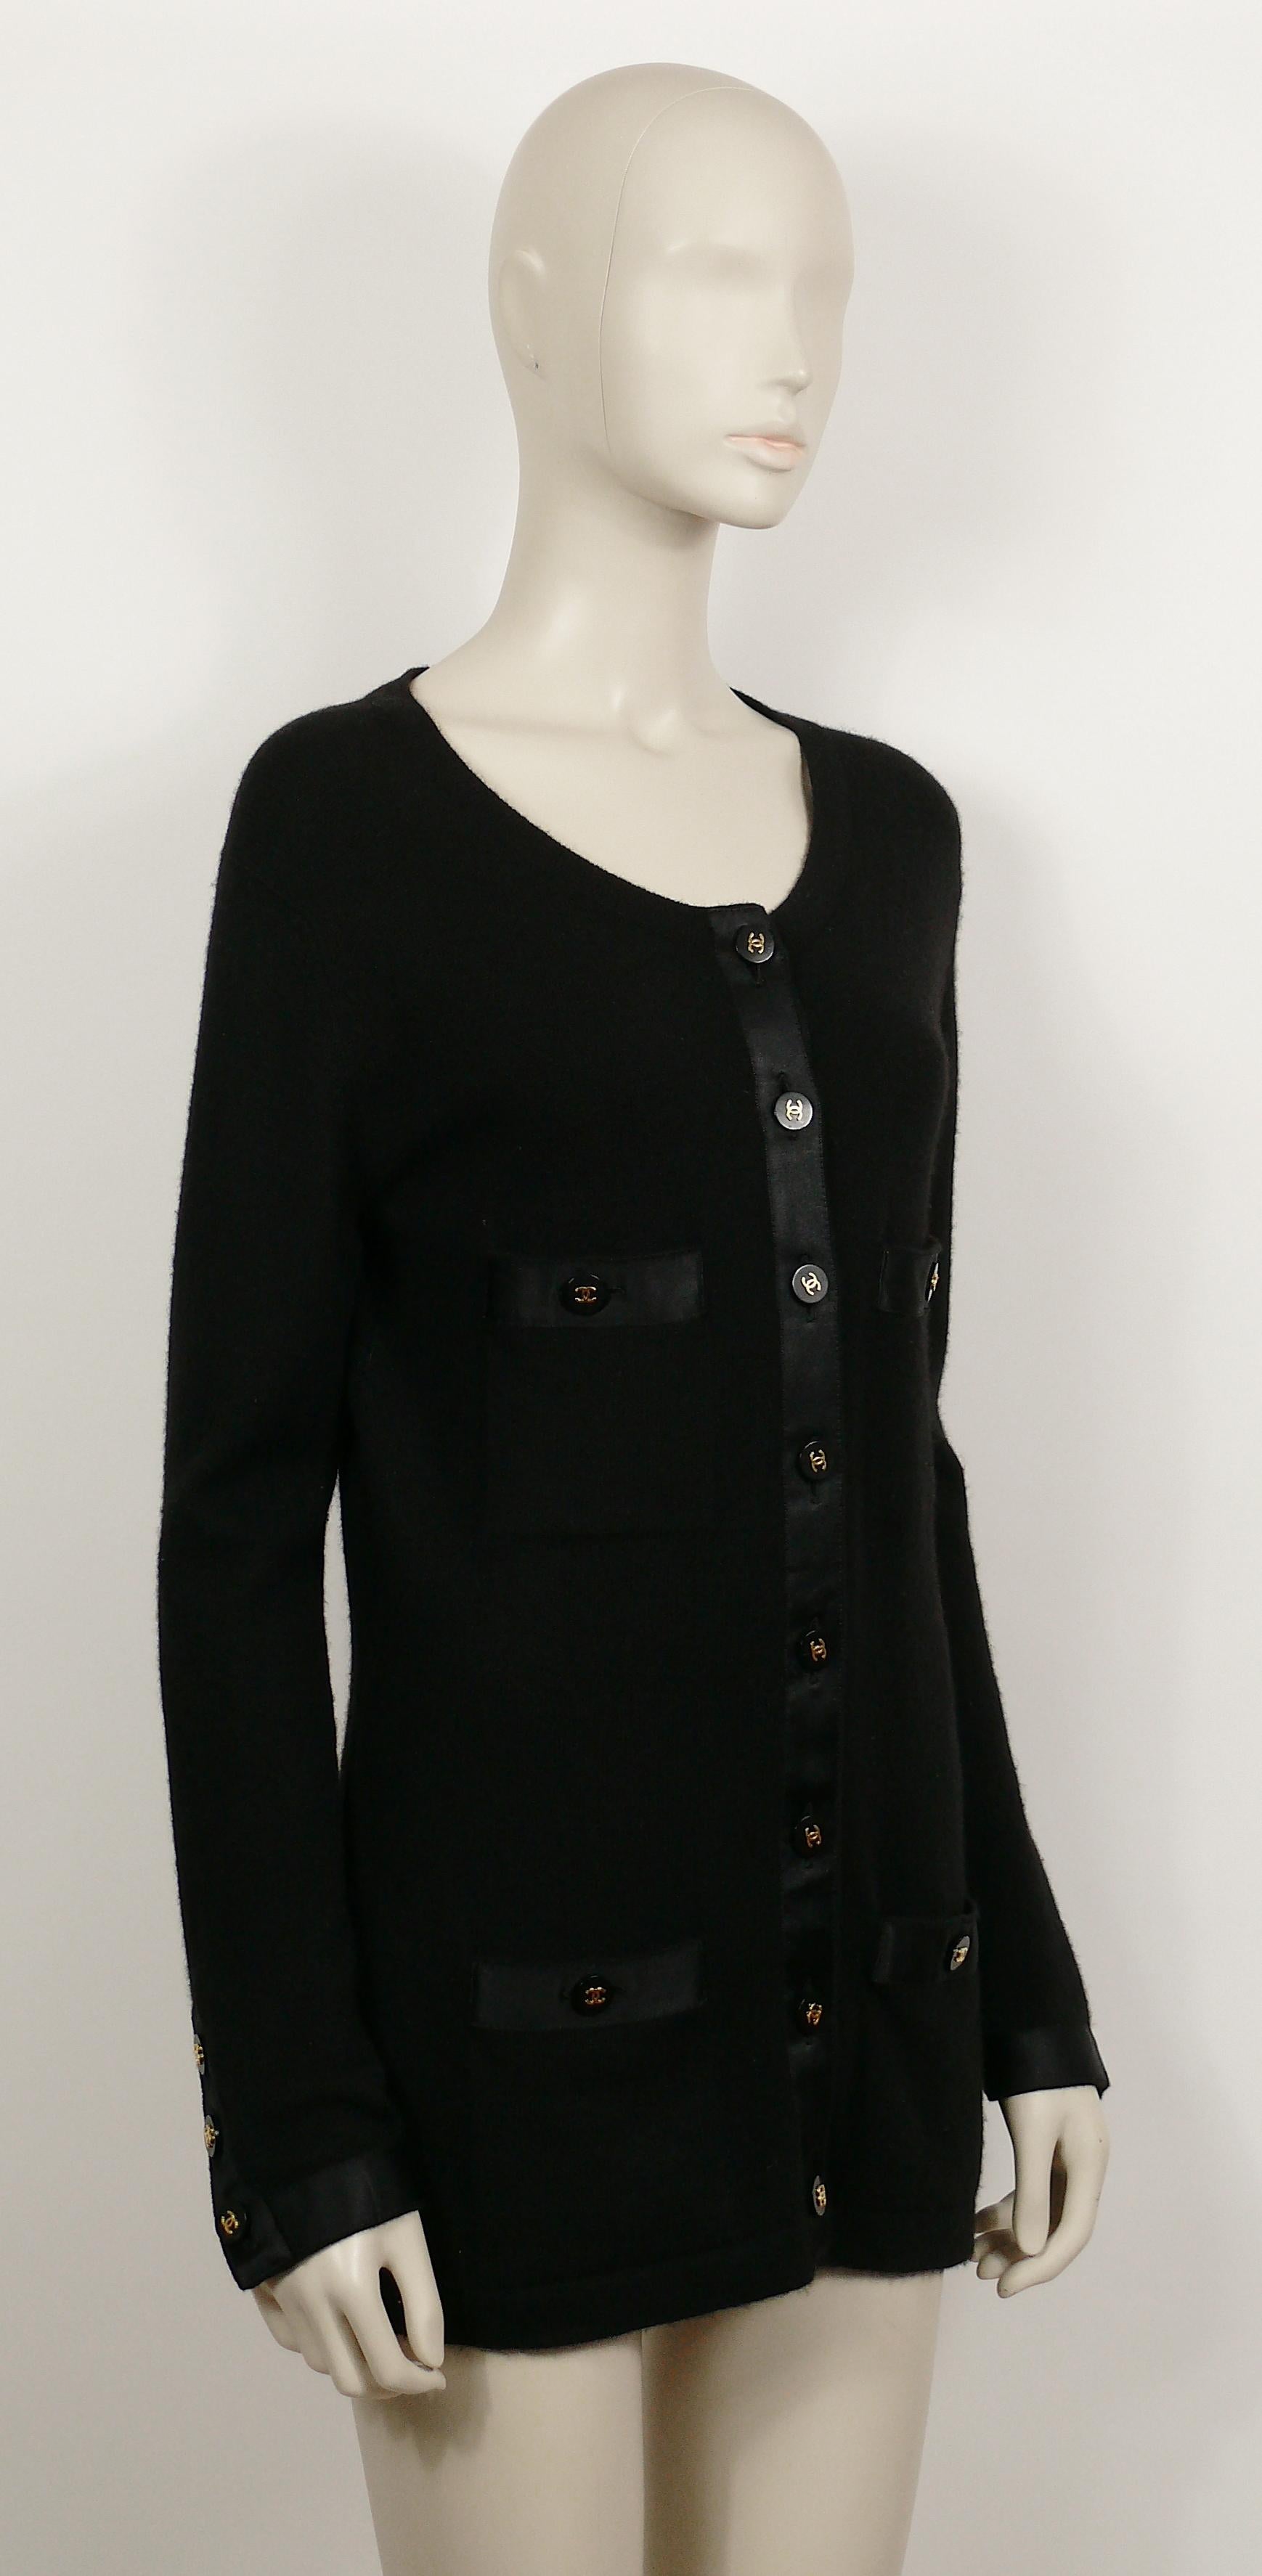 CHANEL vintage iconic black cashmere cardigan featuring eighteen CC logo buttons and black satin ganses.

Crew neck.
Long sleeves.
Four pockets.

Label reads CHANEL MADE IN UNITED KINGDOM 95A.

Size tag reads : 42.
Please refer to measurements.